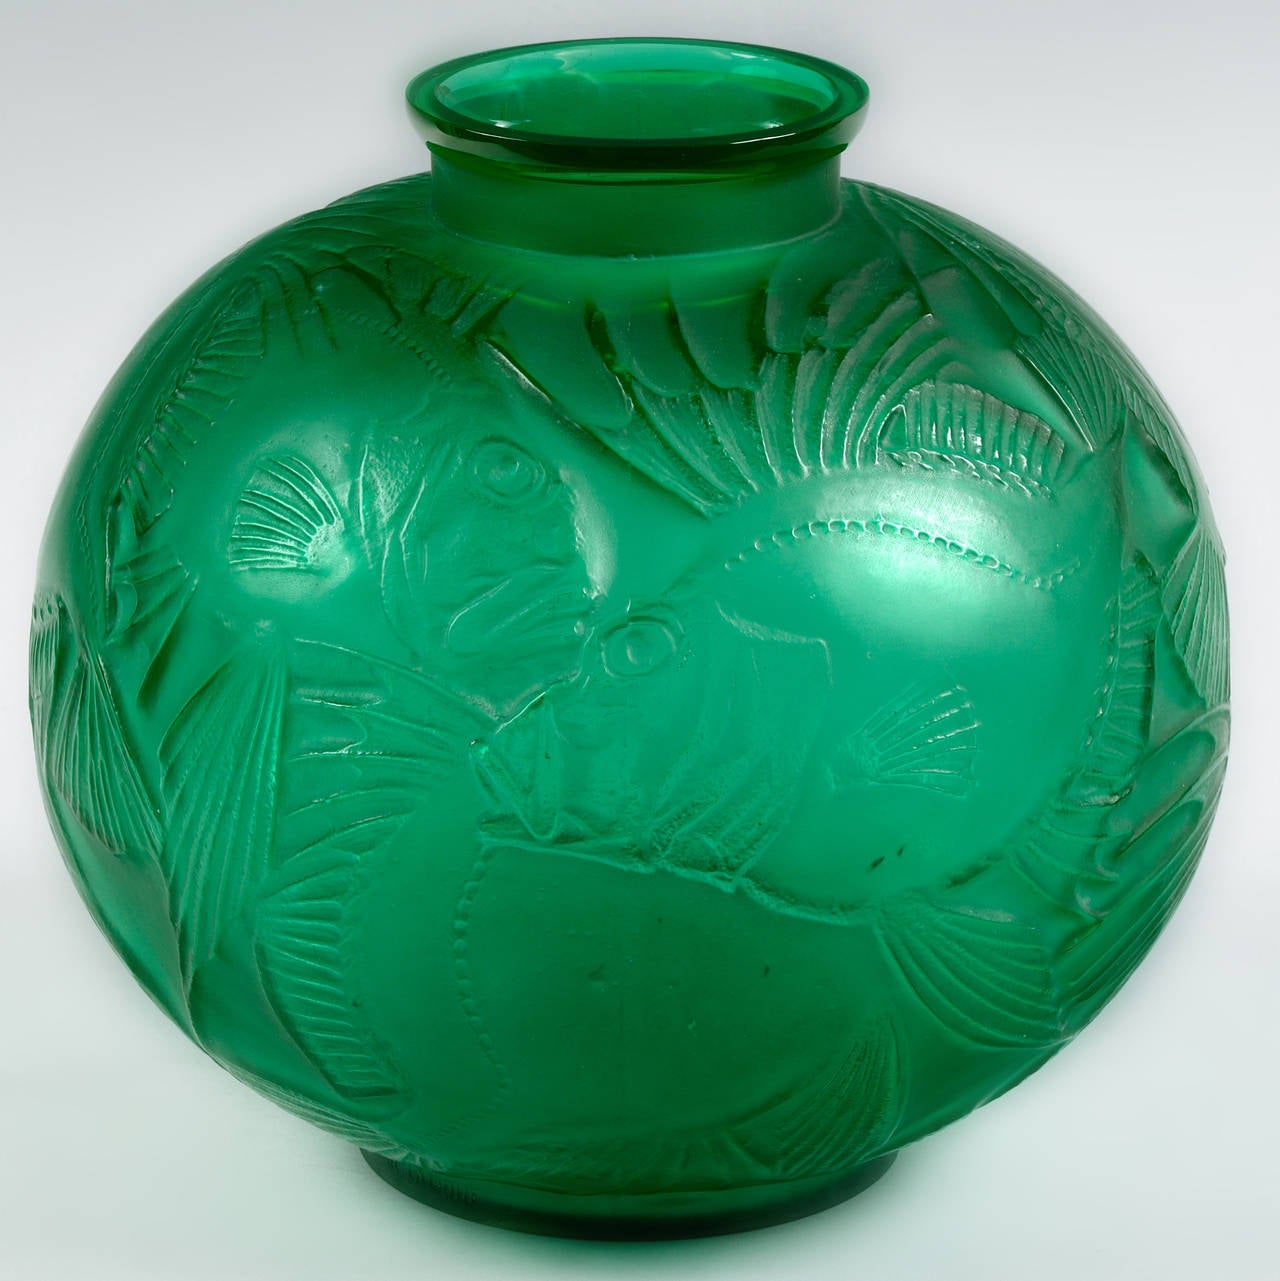 Lalique
Emerald Green Poissons - Fishes Vase
Designed 1921
Engraved «R. Lalique France N° 925»
Height: 23.7 cm (9